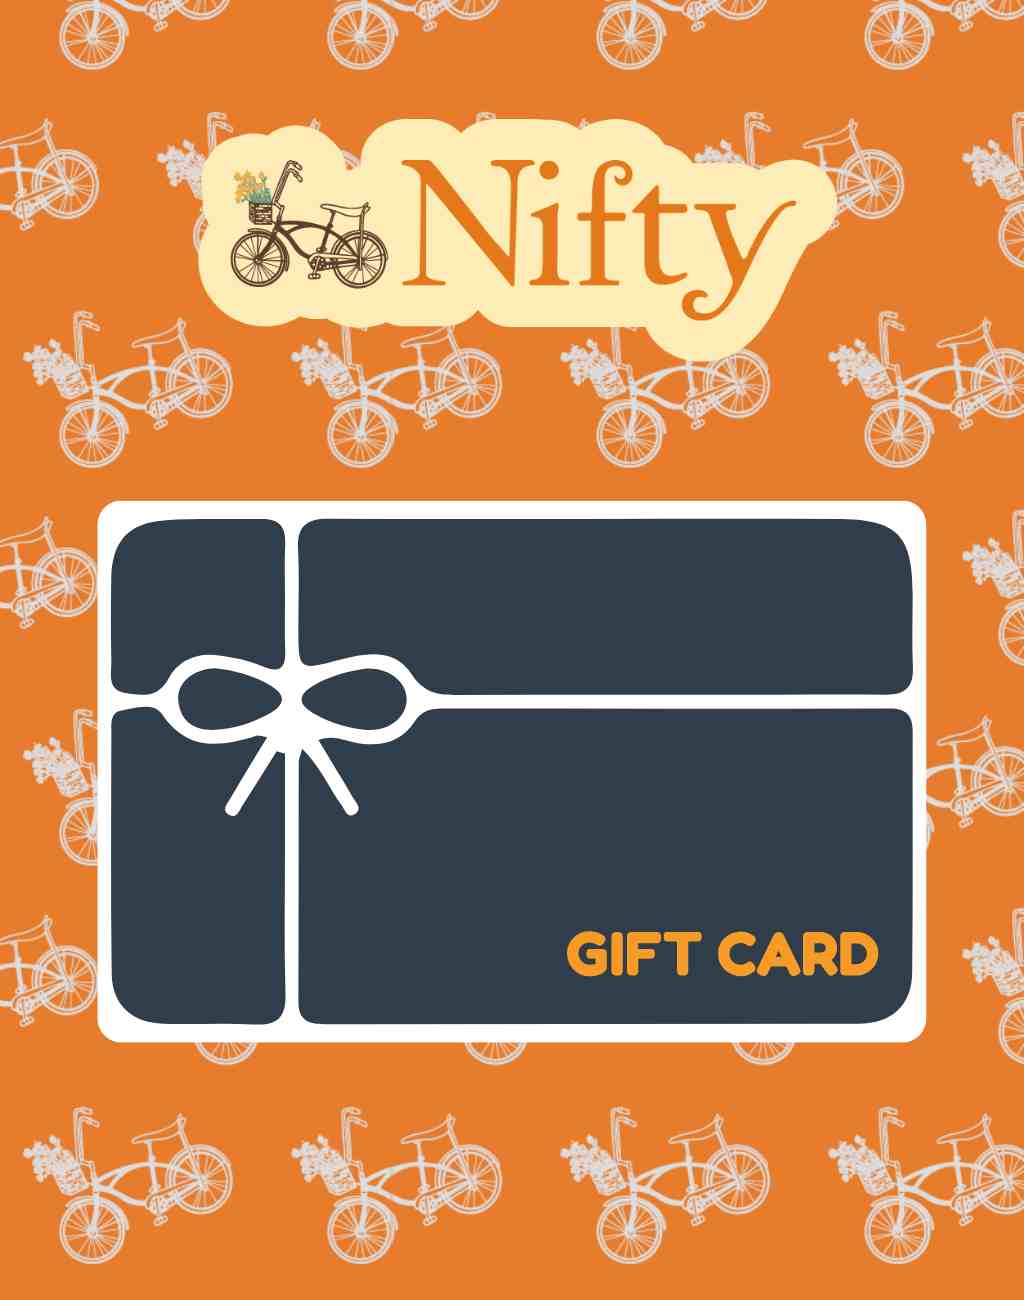 Nifty Gift Card